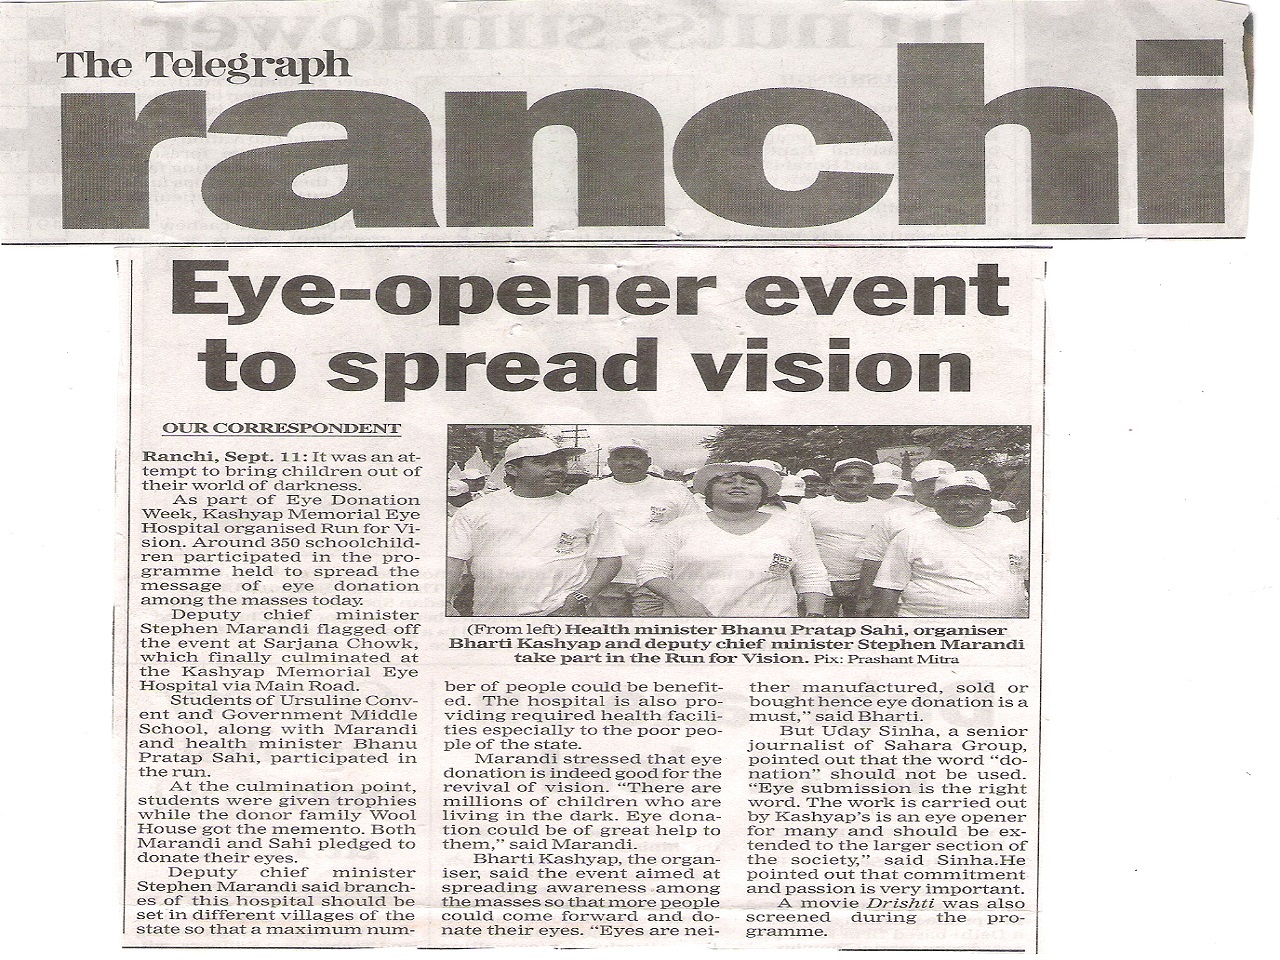 Dr. Bharti Kashyap: Run for Vision - 2008